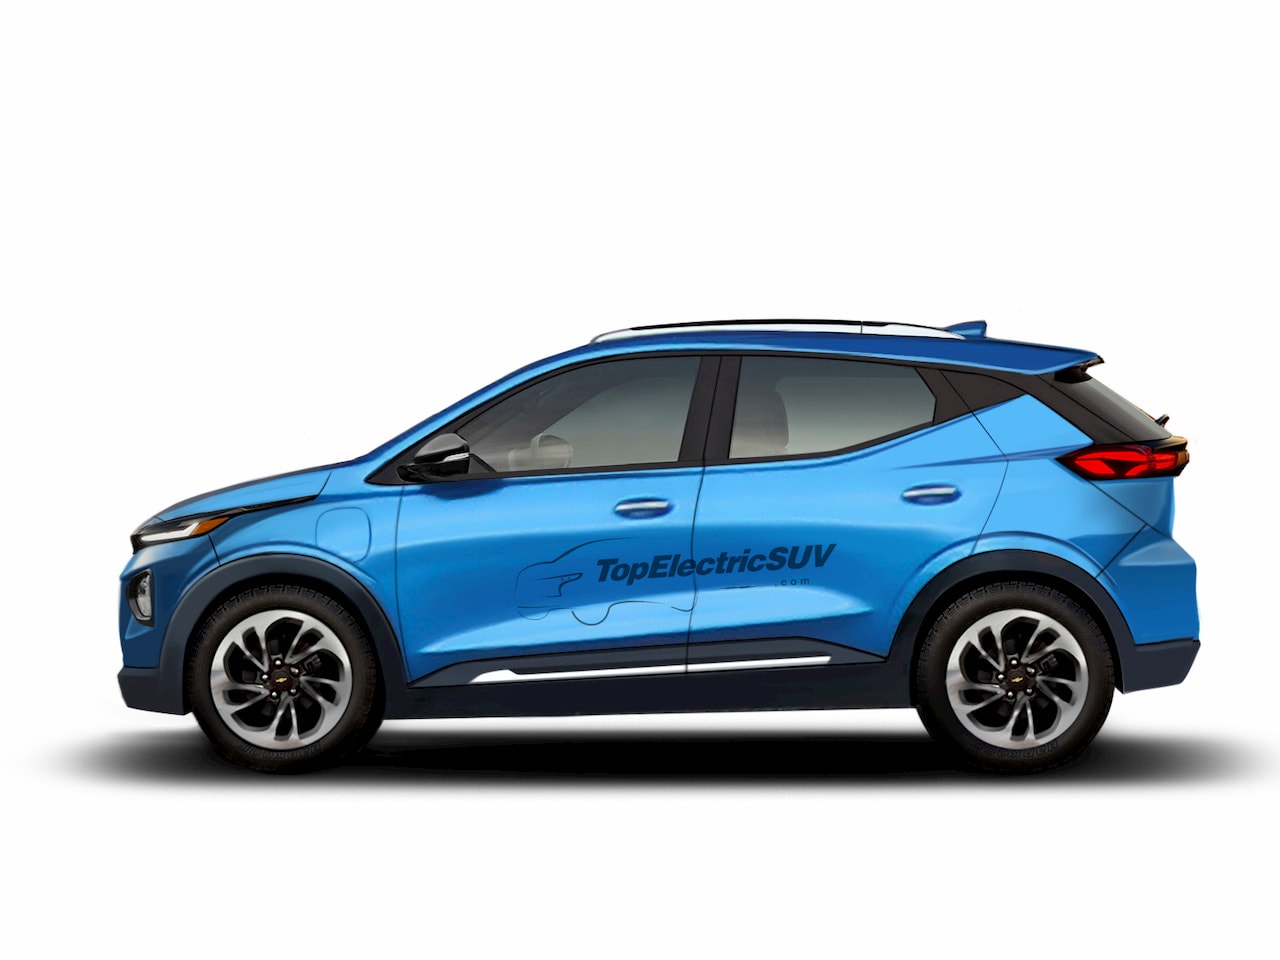 2022-chevy-bolt-euv-rendering-is-probably-spot-on-thanks-to-official